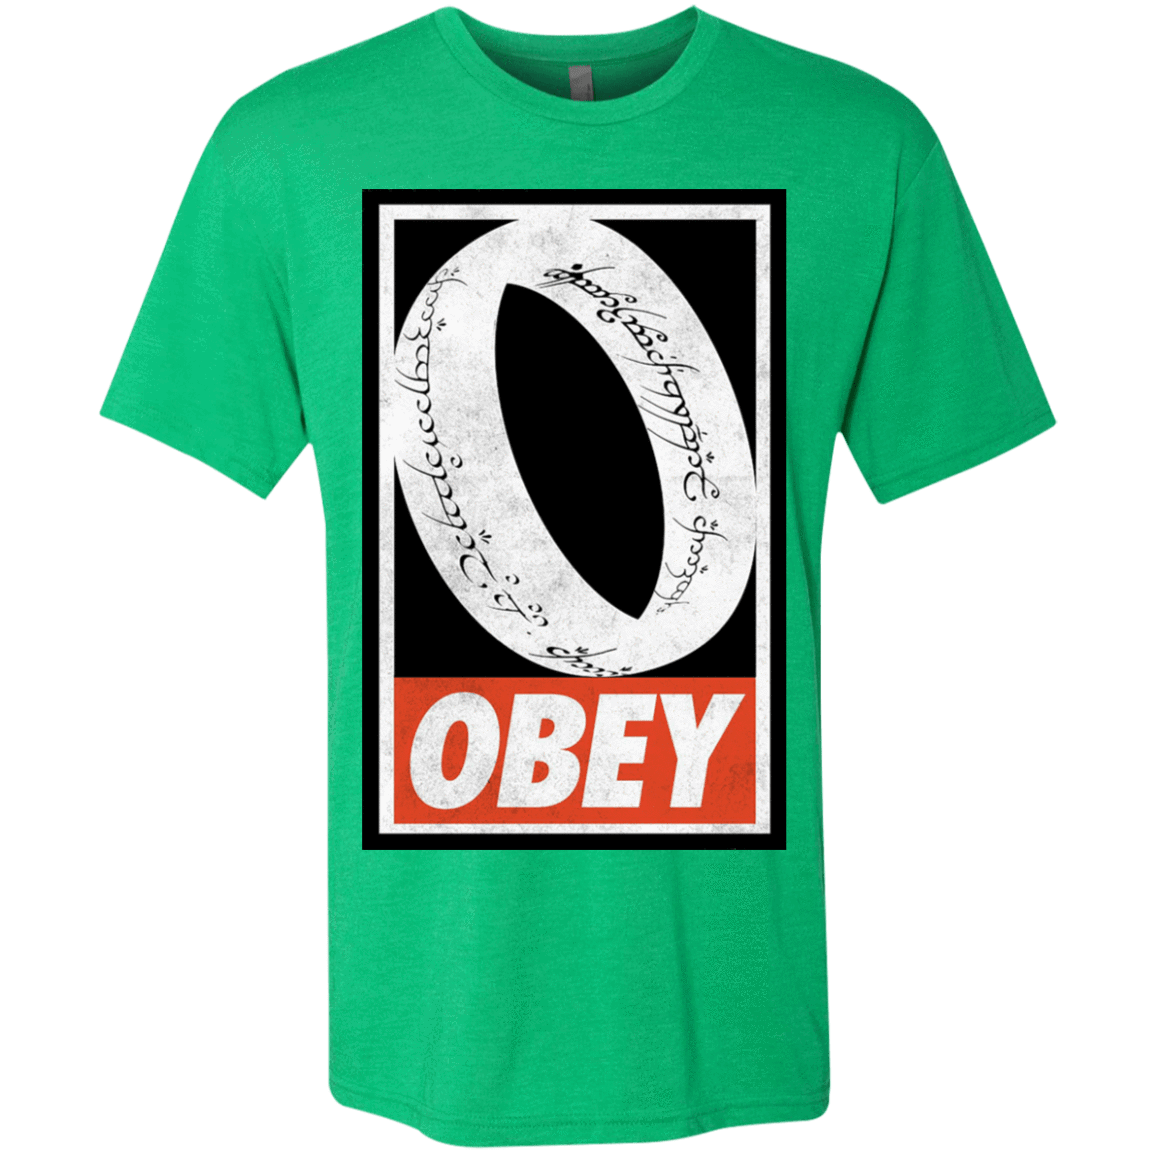 T-Shirts Envy / S Obey One Ring Men's Triblend T-Shirt